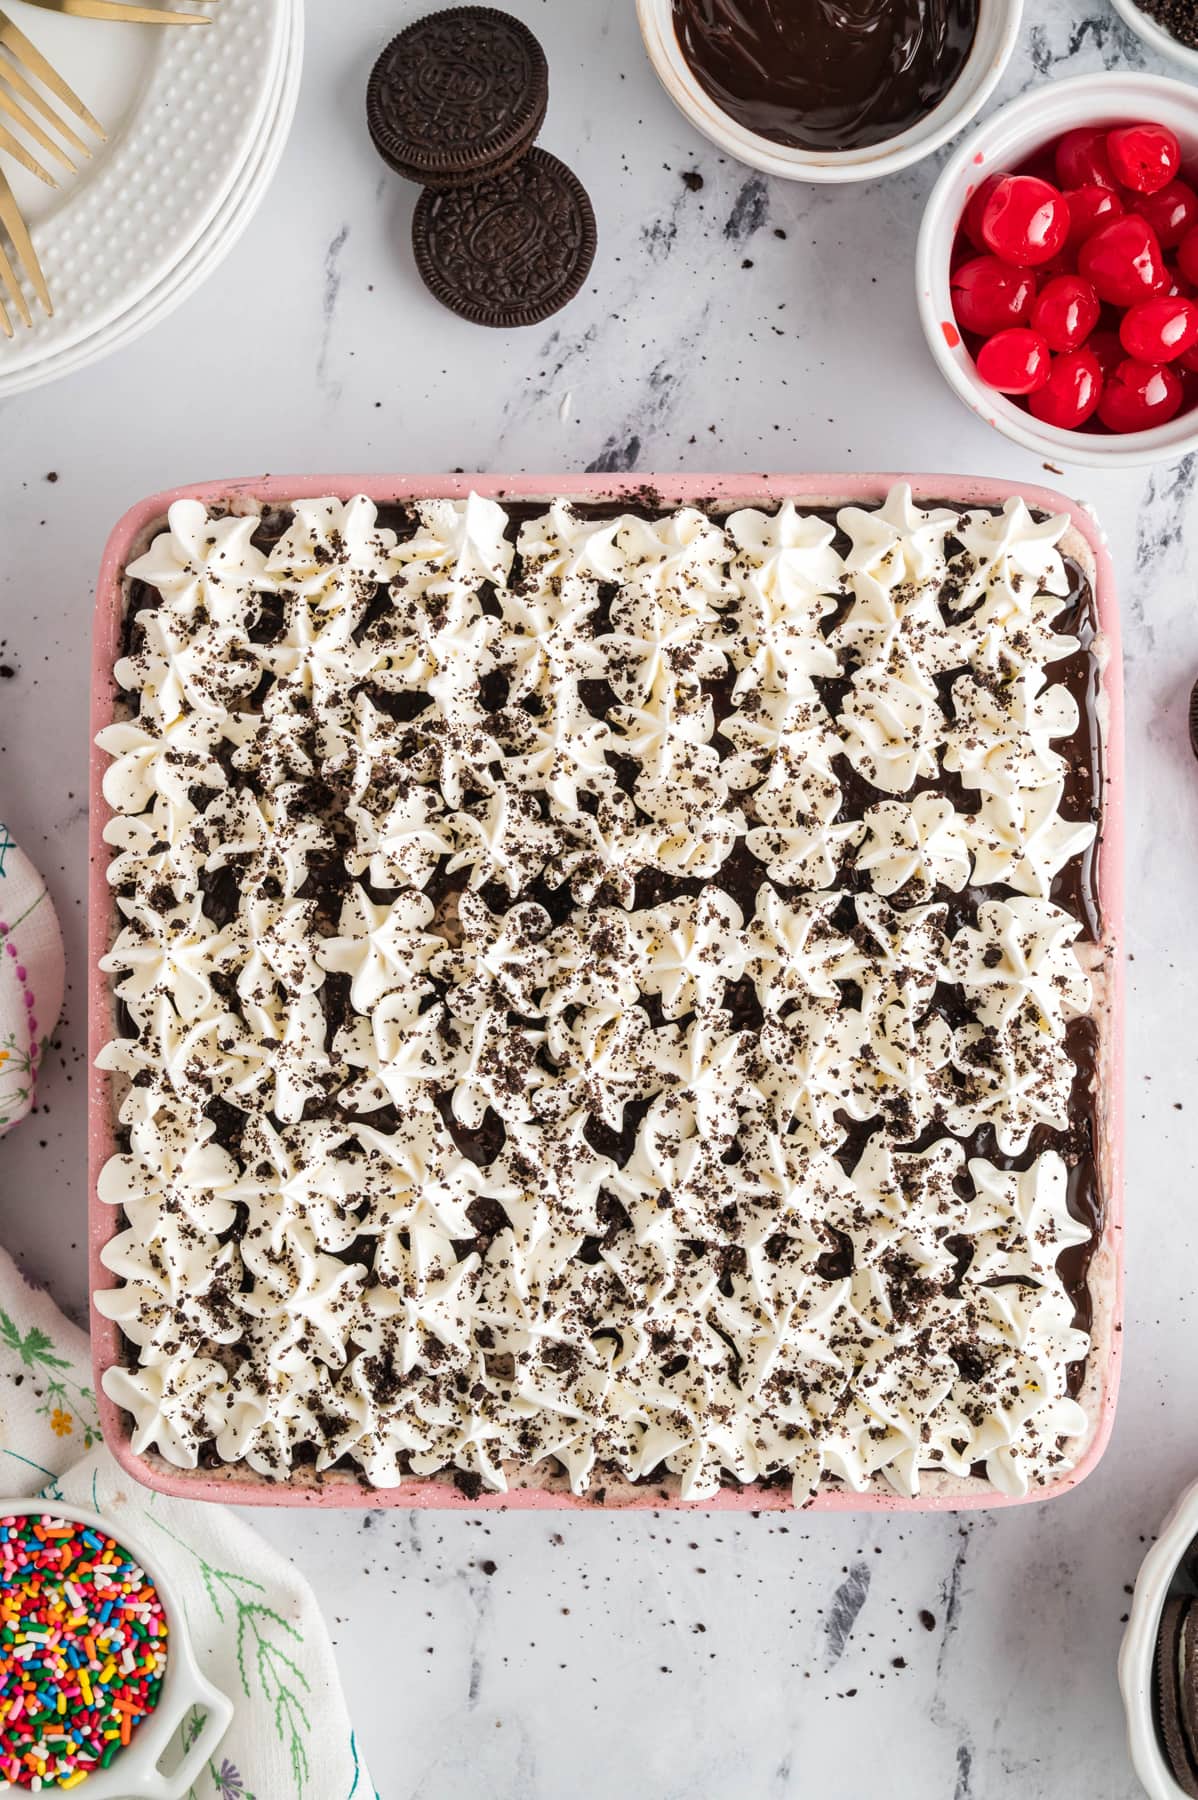 Ice cream cake topped with dollops of whipped topping and oreo crumbs